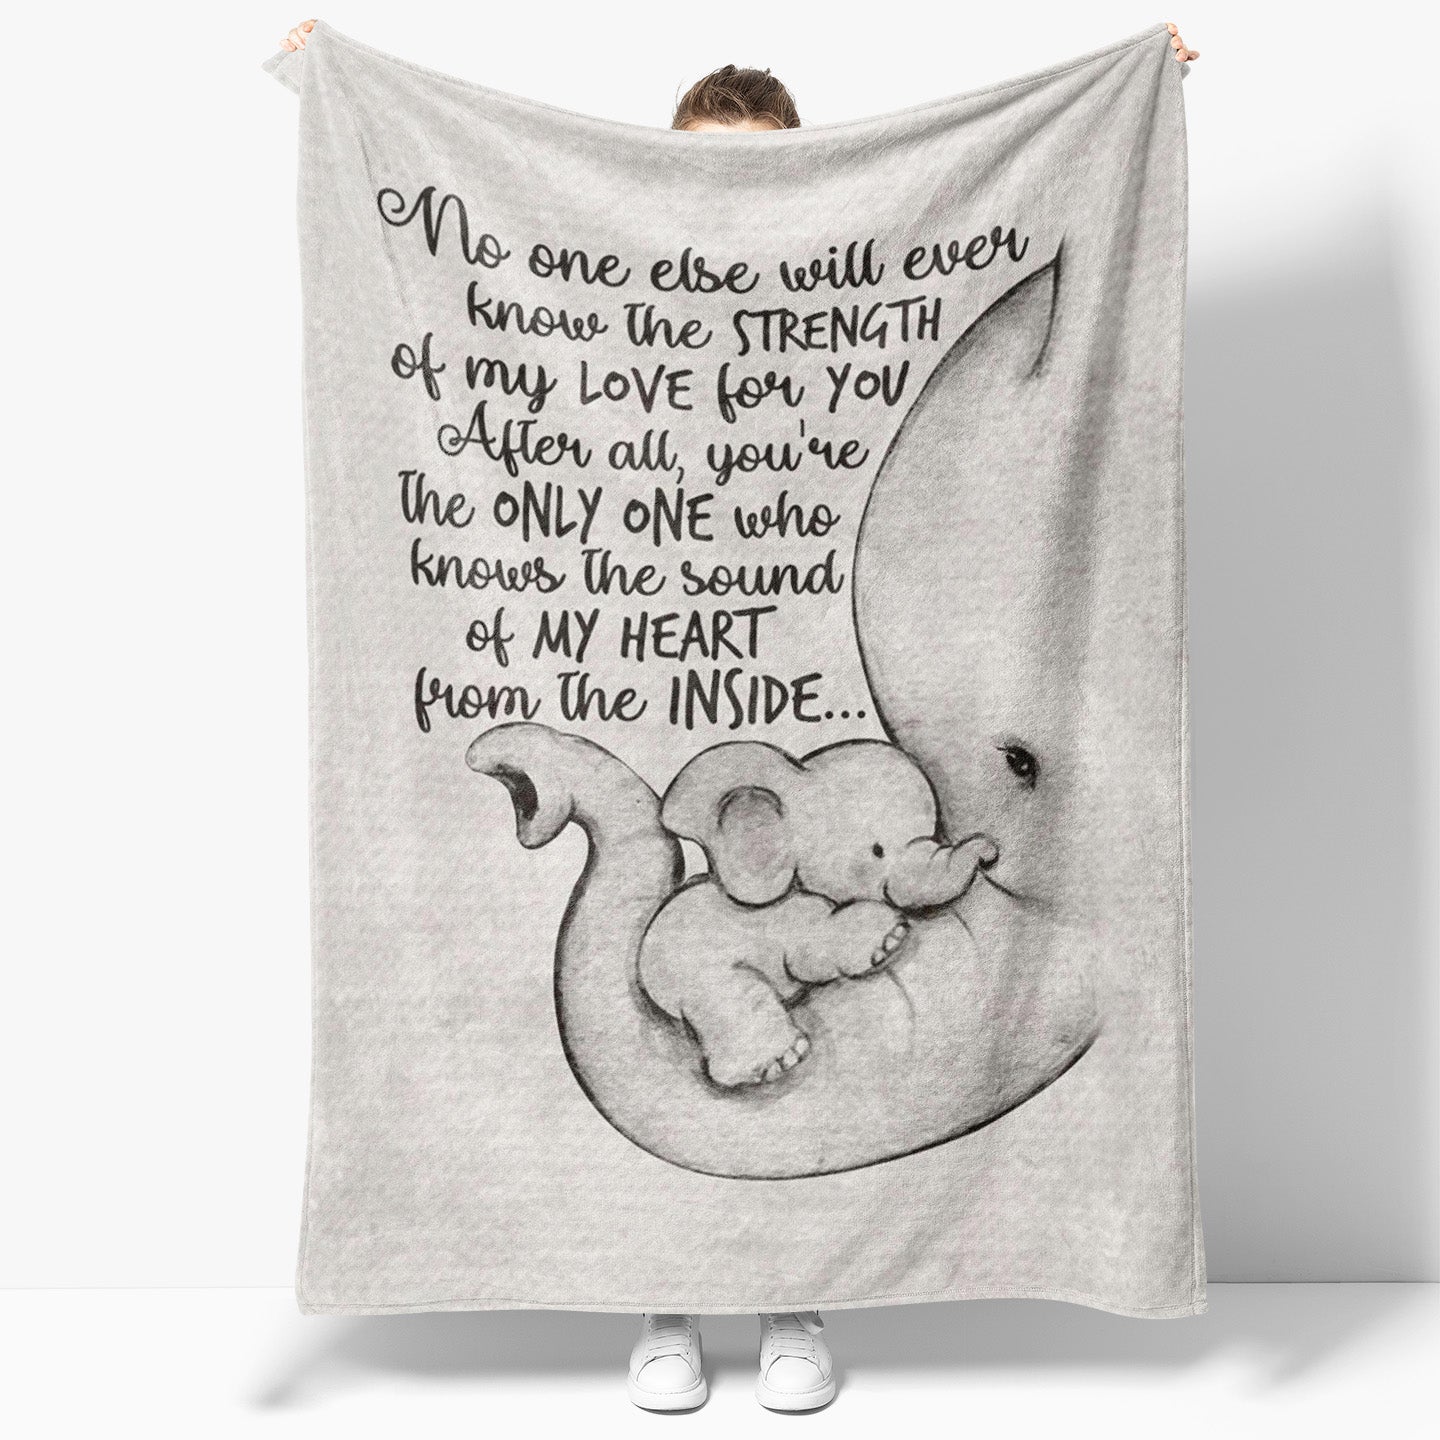 Blanket Gift Ideas For Mom, Thoughtful First Mothers Day Gifts Ideas, Baby Elephant